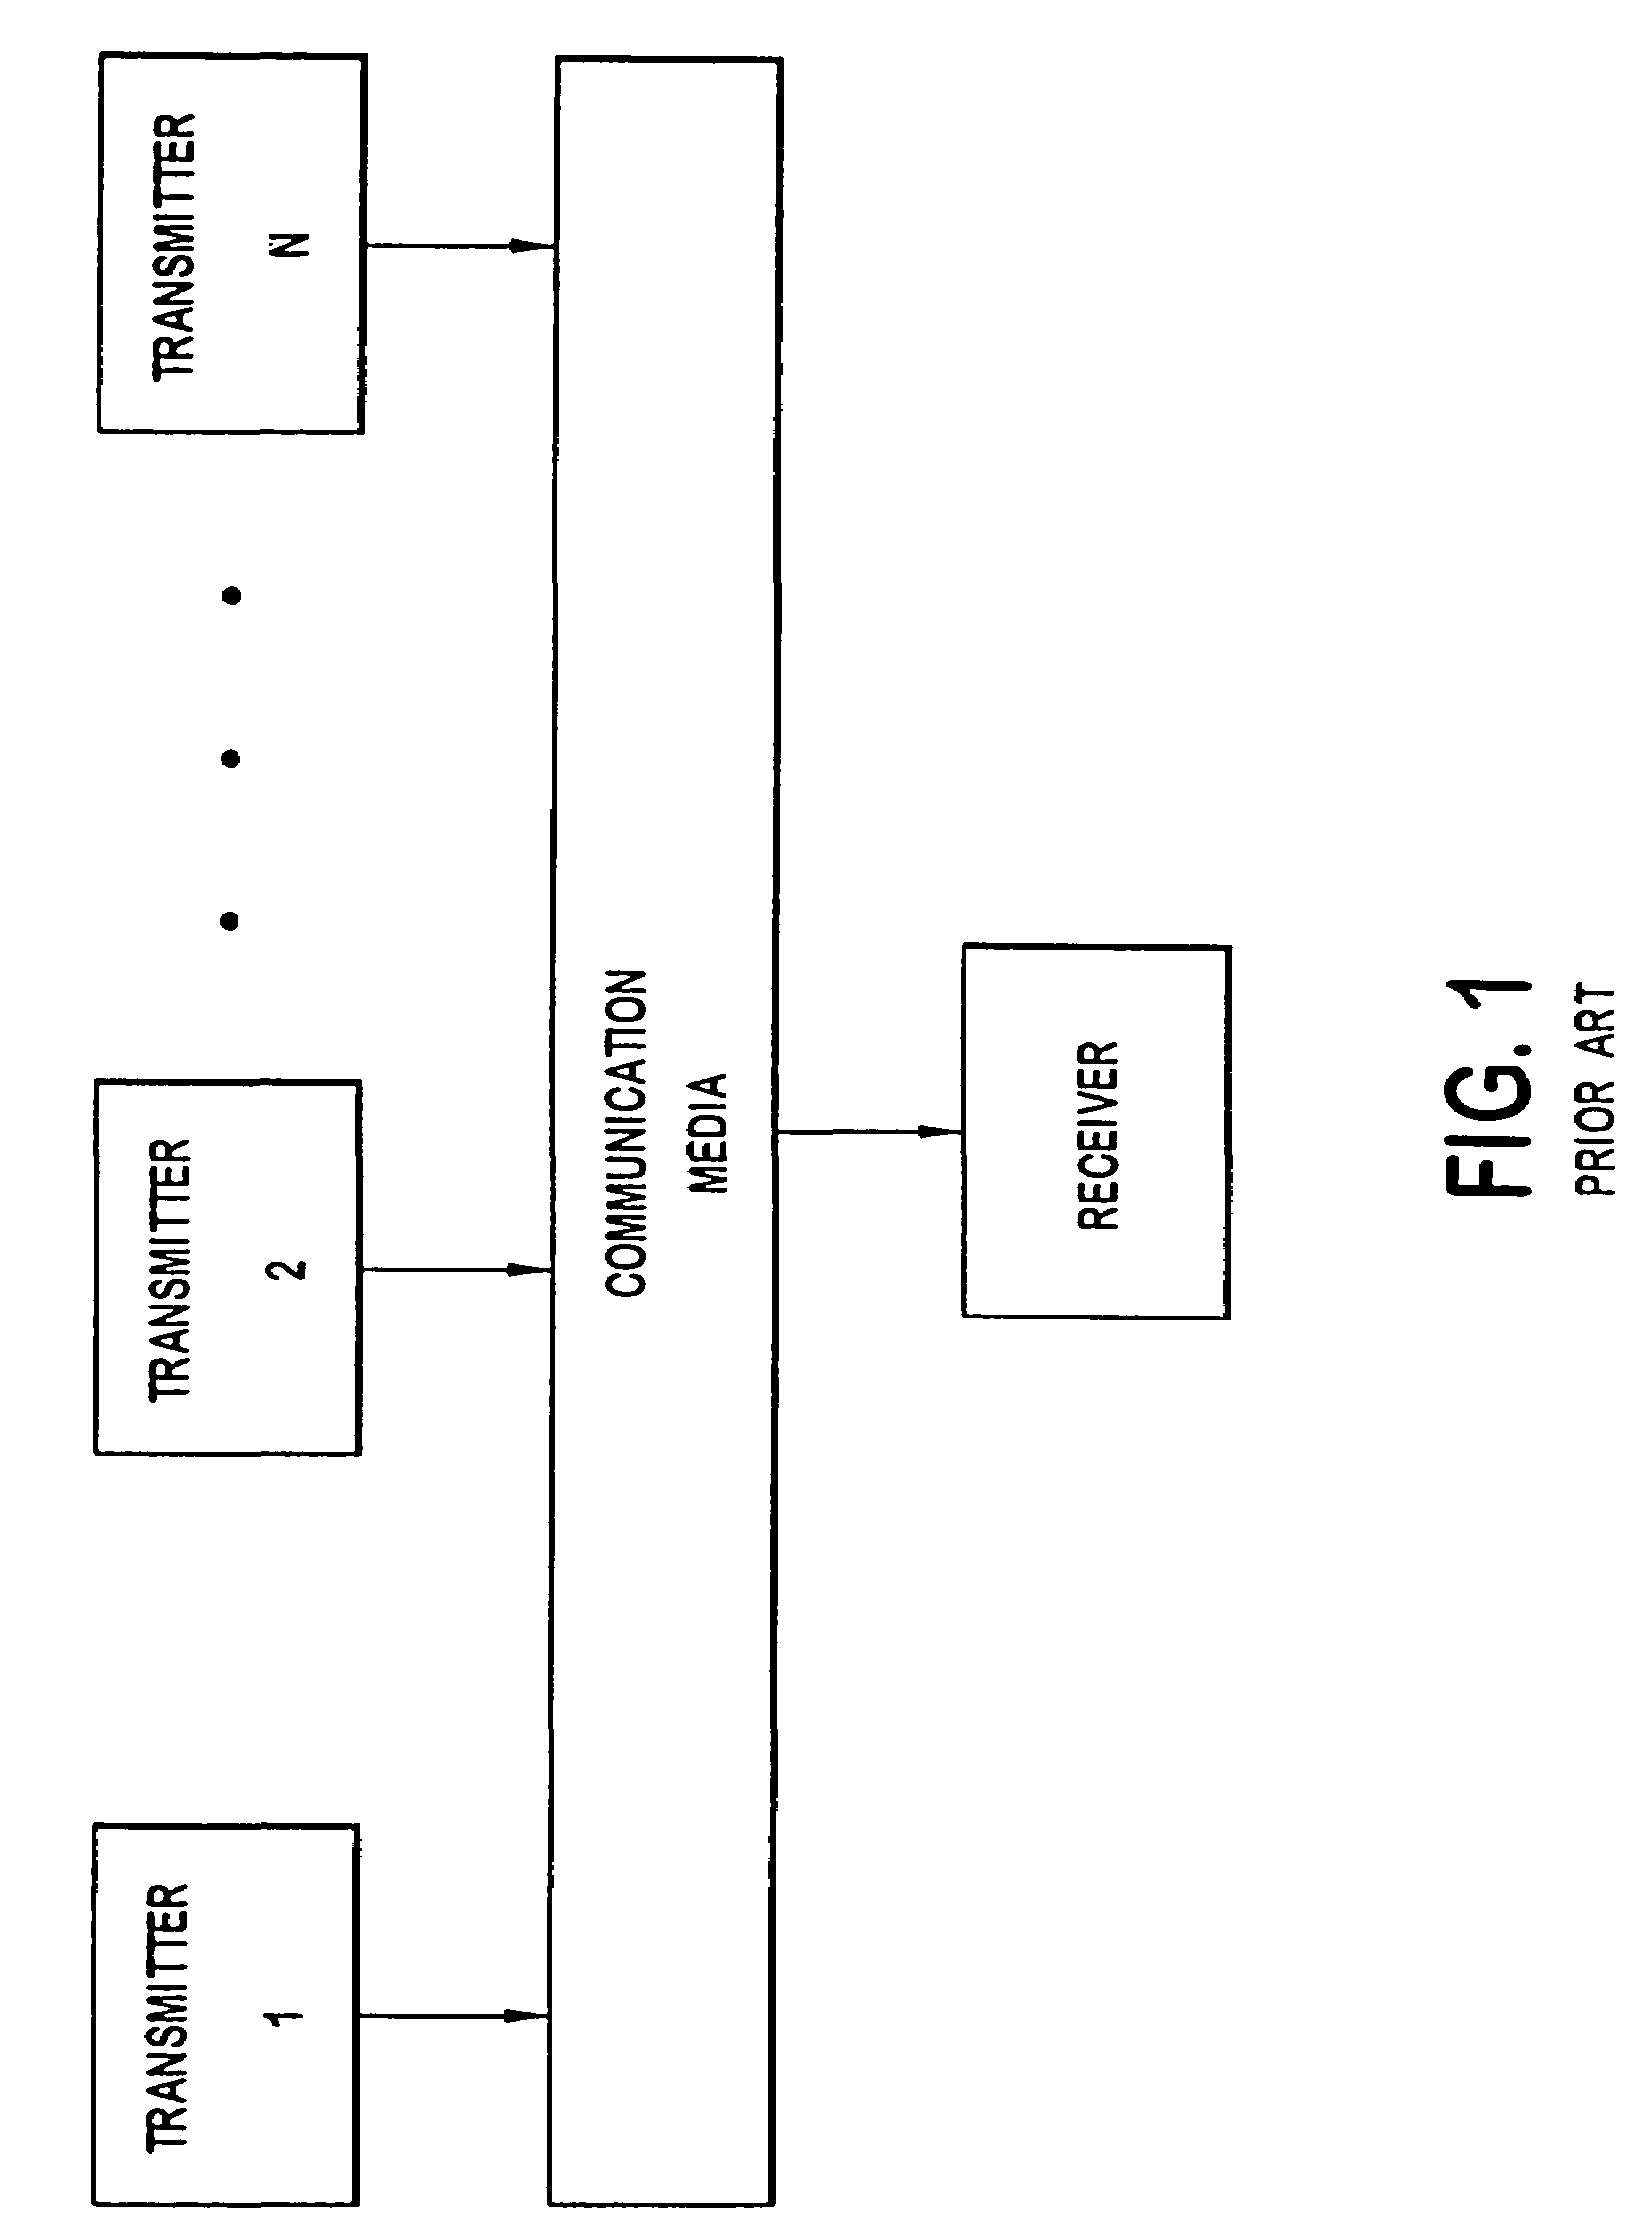 Parallel interference cancellation receiver for multiuser detection CDMA signals